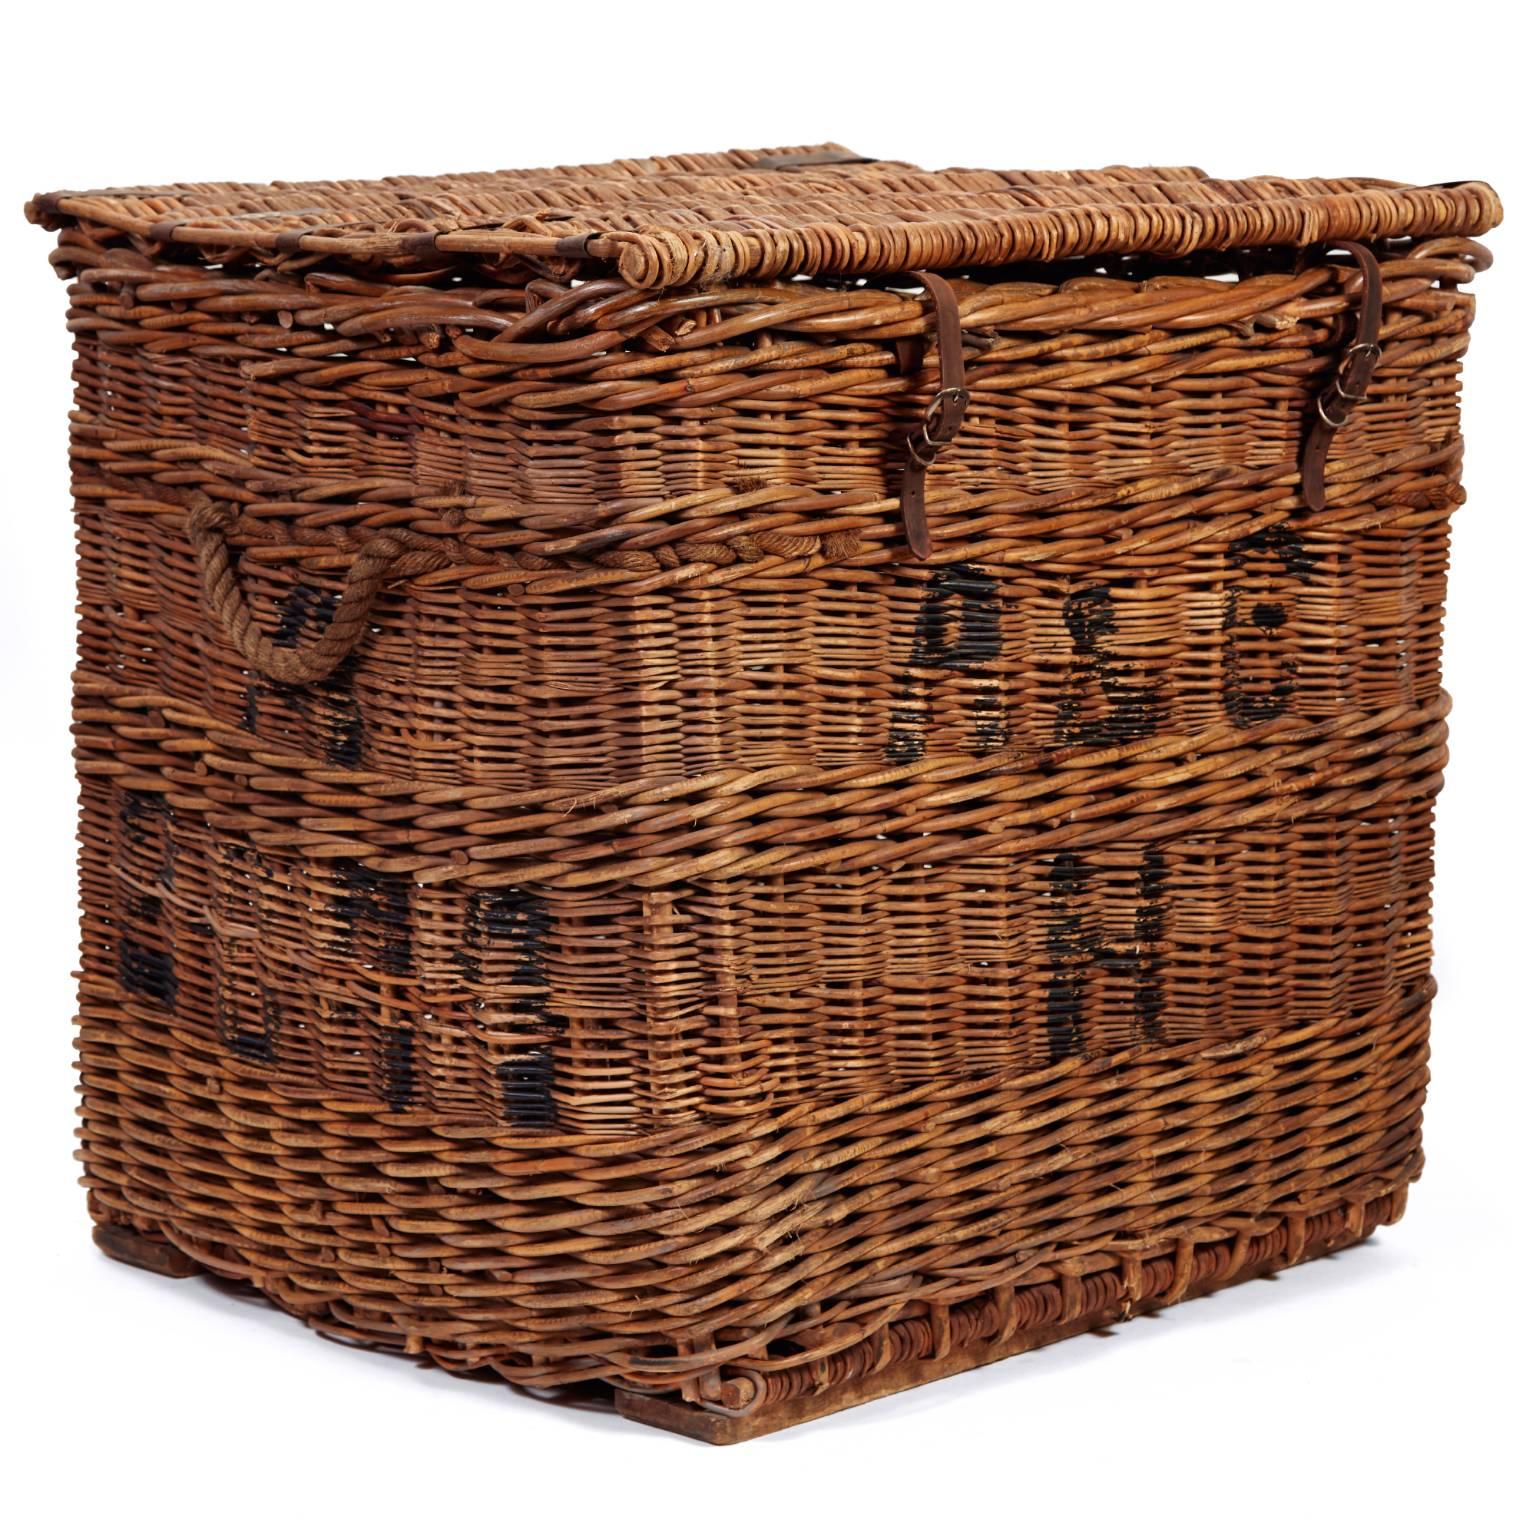 Once used for sorting and shipping letters, this vintage French mail basket is woven from rattan on a sturdy square frame. The lid closes with leather hinges, straps and metal buckles. The sides feature stenciled letters, and rope handles make it